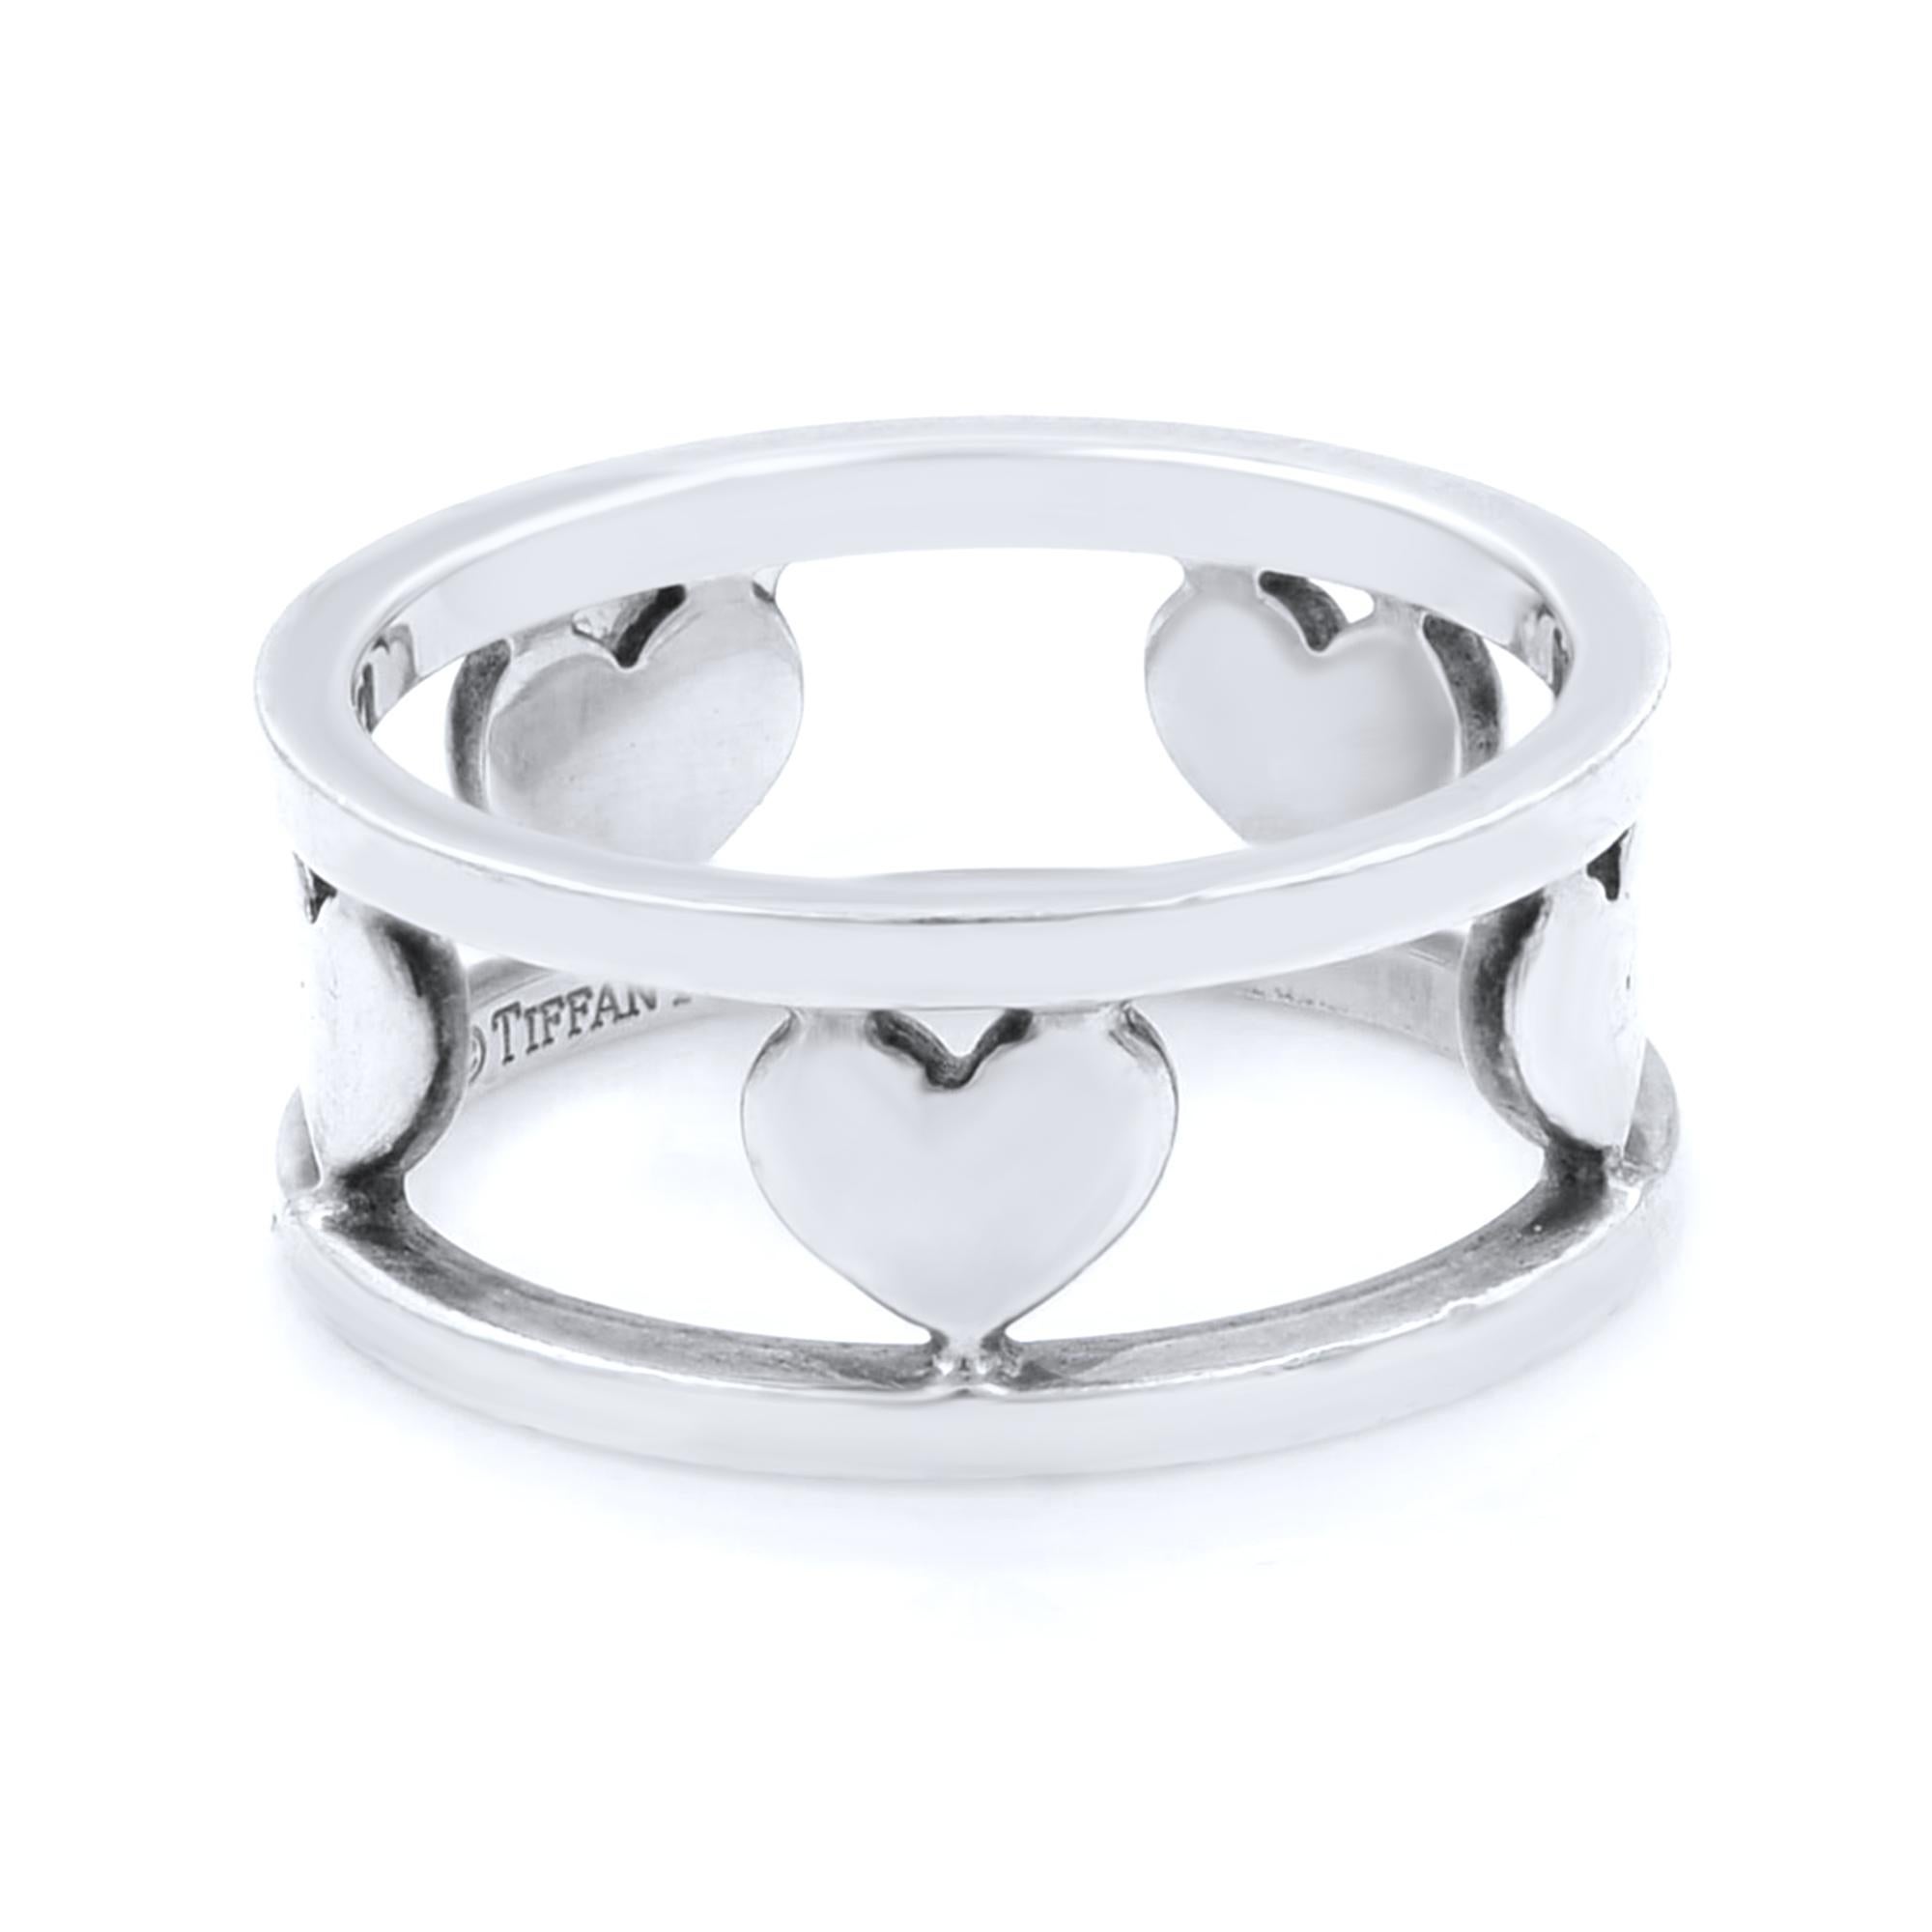 An Authentic Tiffany & Co Sterling Silver Open Heart Eternity Ring.
Size: 7
Width: 8.6mm
Pouch: Yes
Will polish before shipping.
Pre-owned good condition.